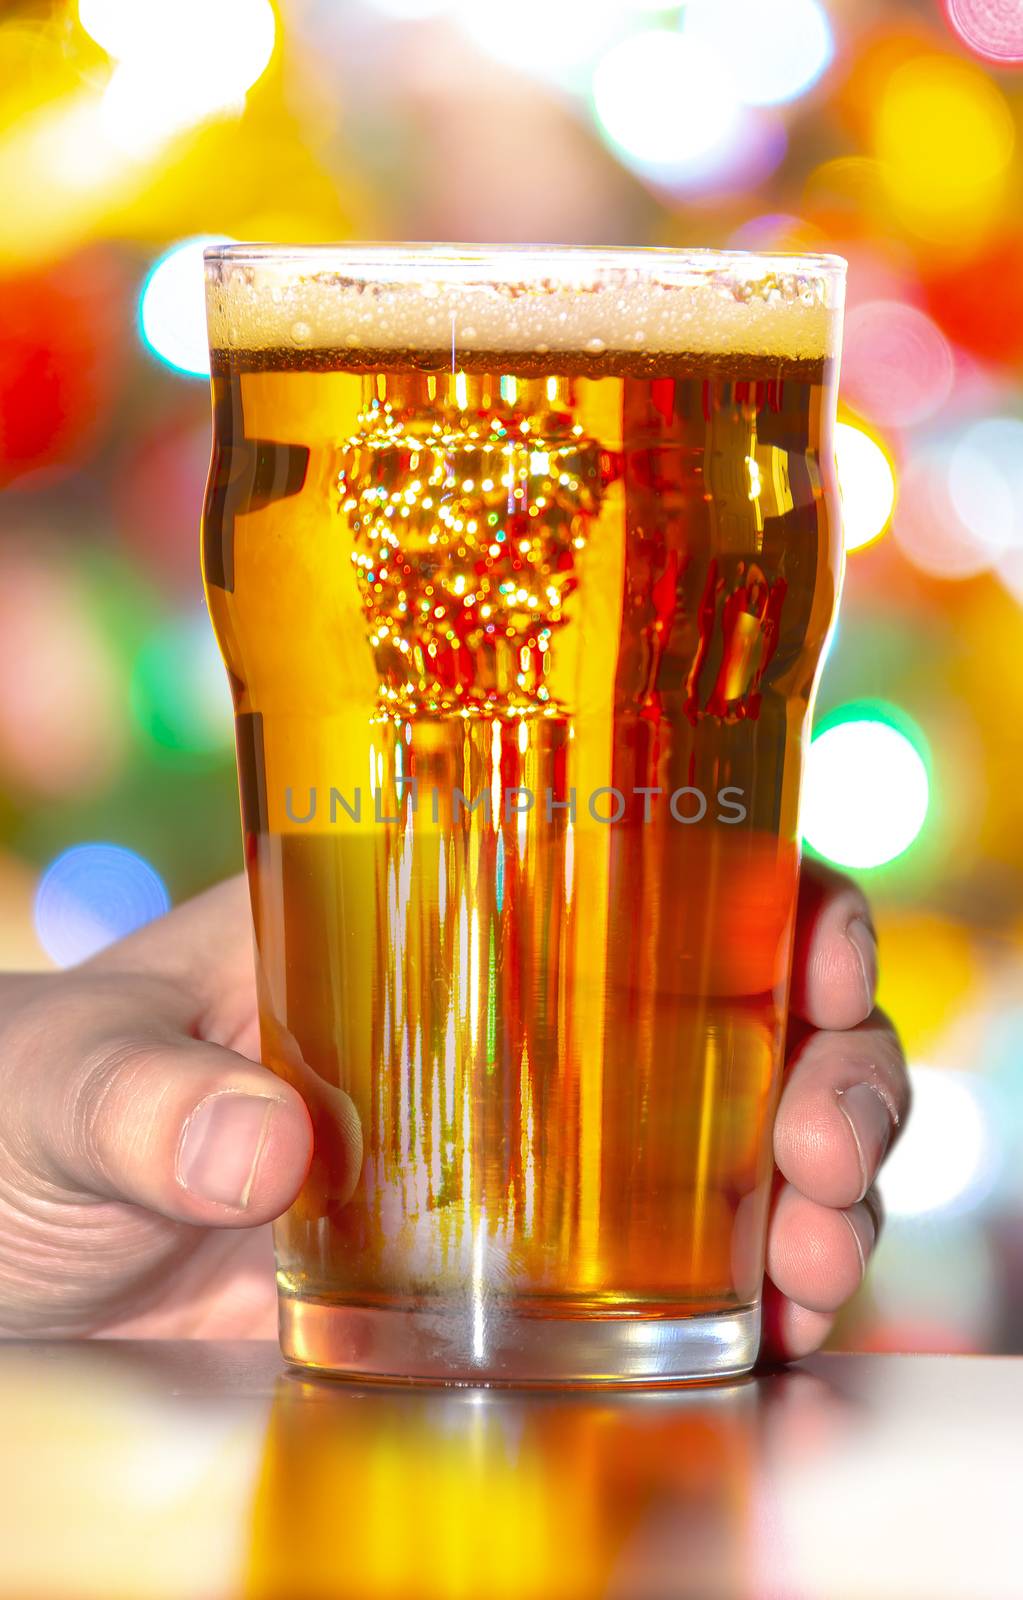 A Beer pint and glass with Christmas lights on the background by oasisamuel